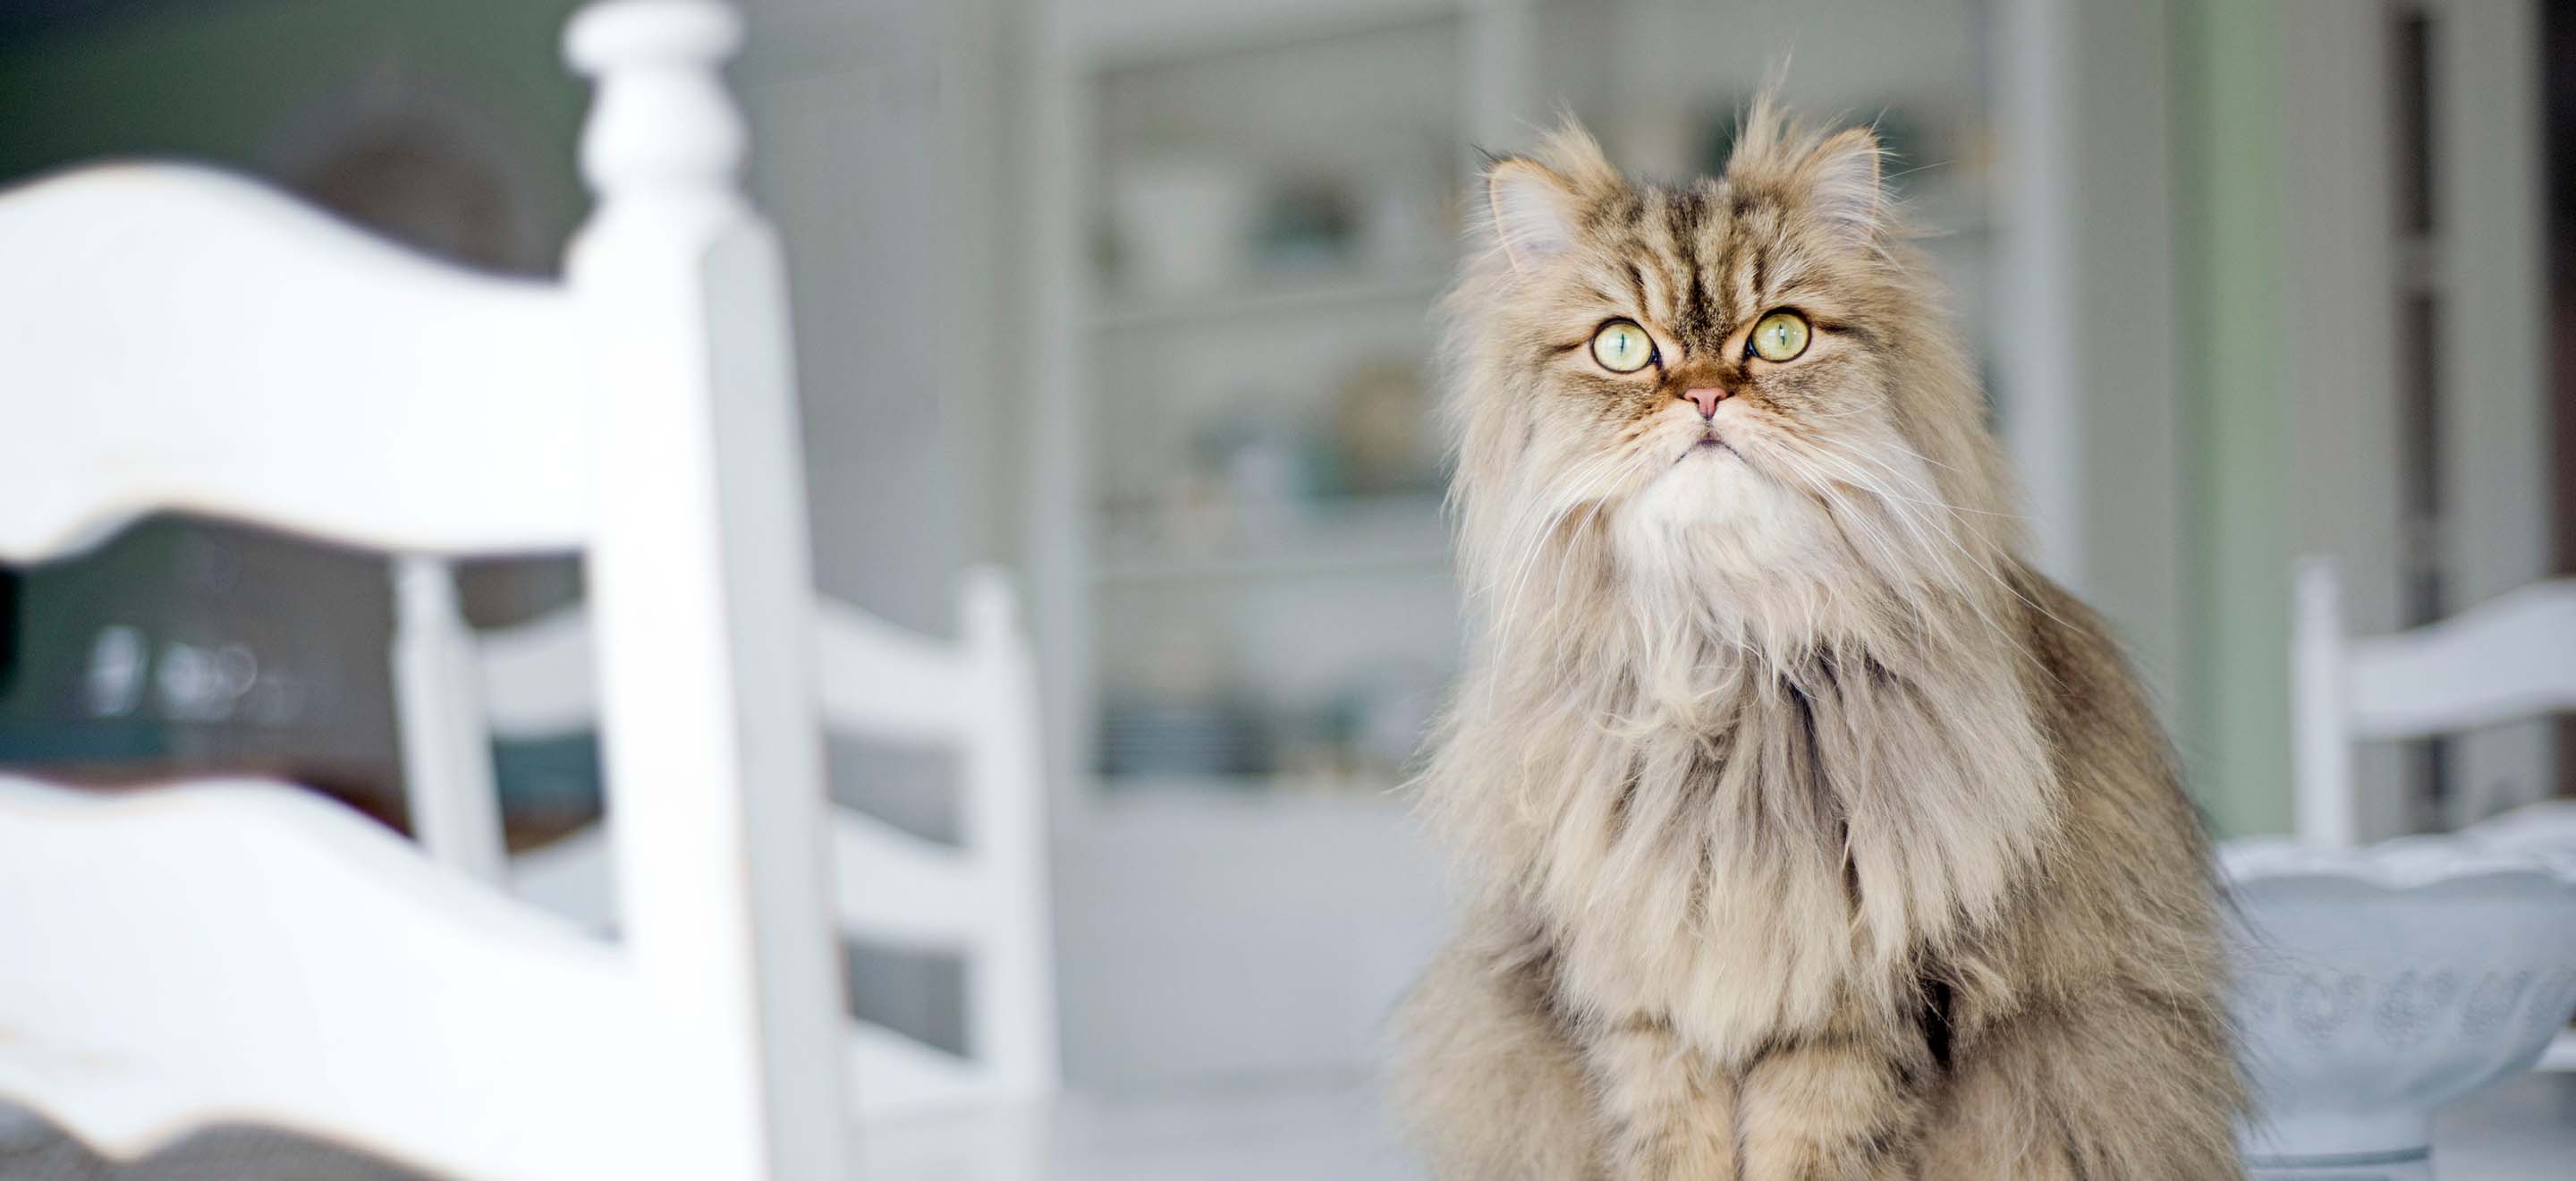 Tan colored Persian cat sitting on a kitchen table image